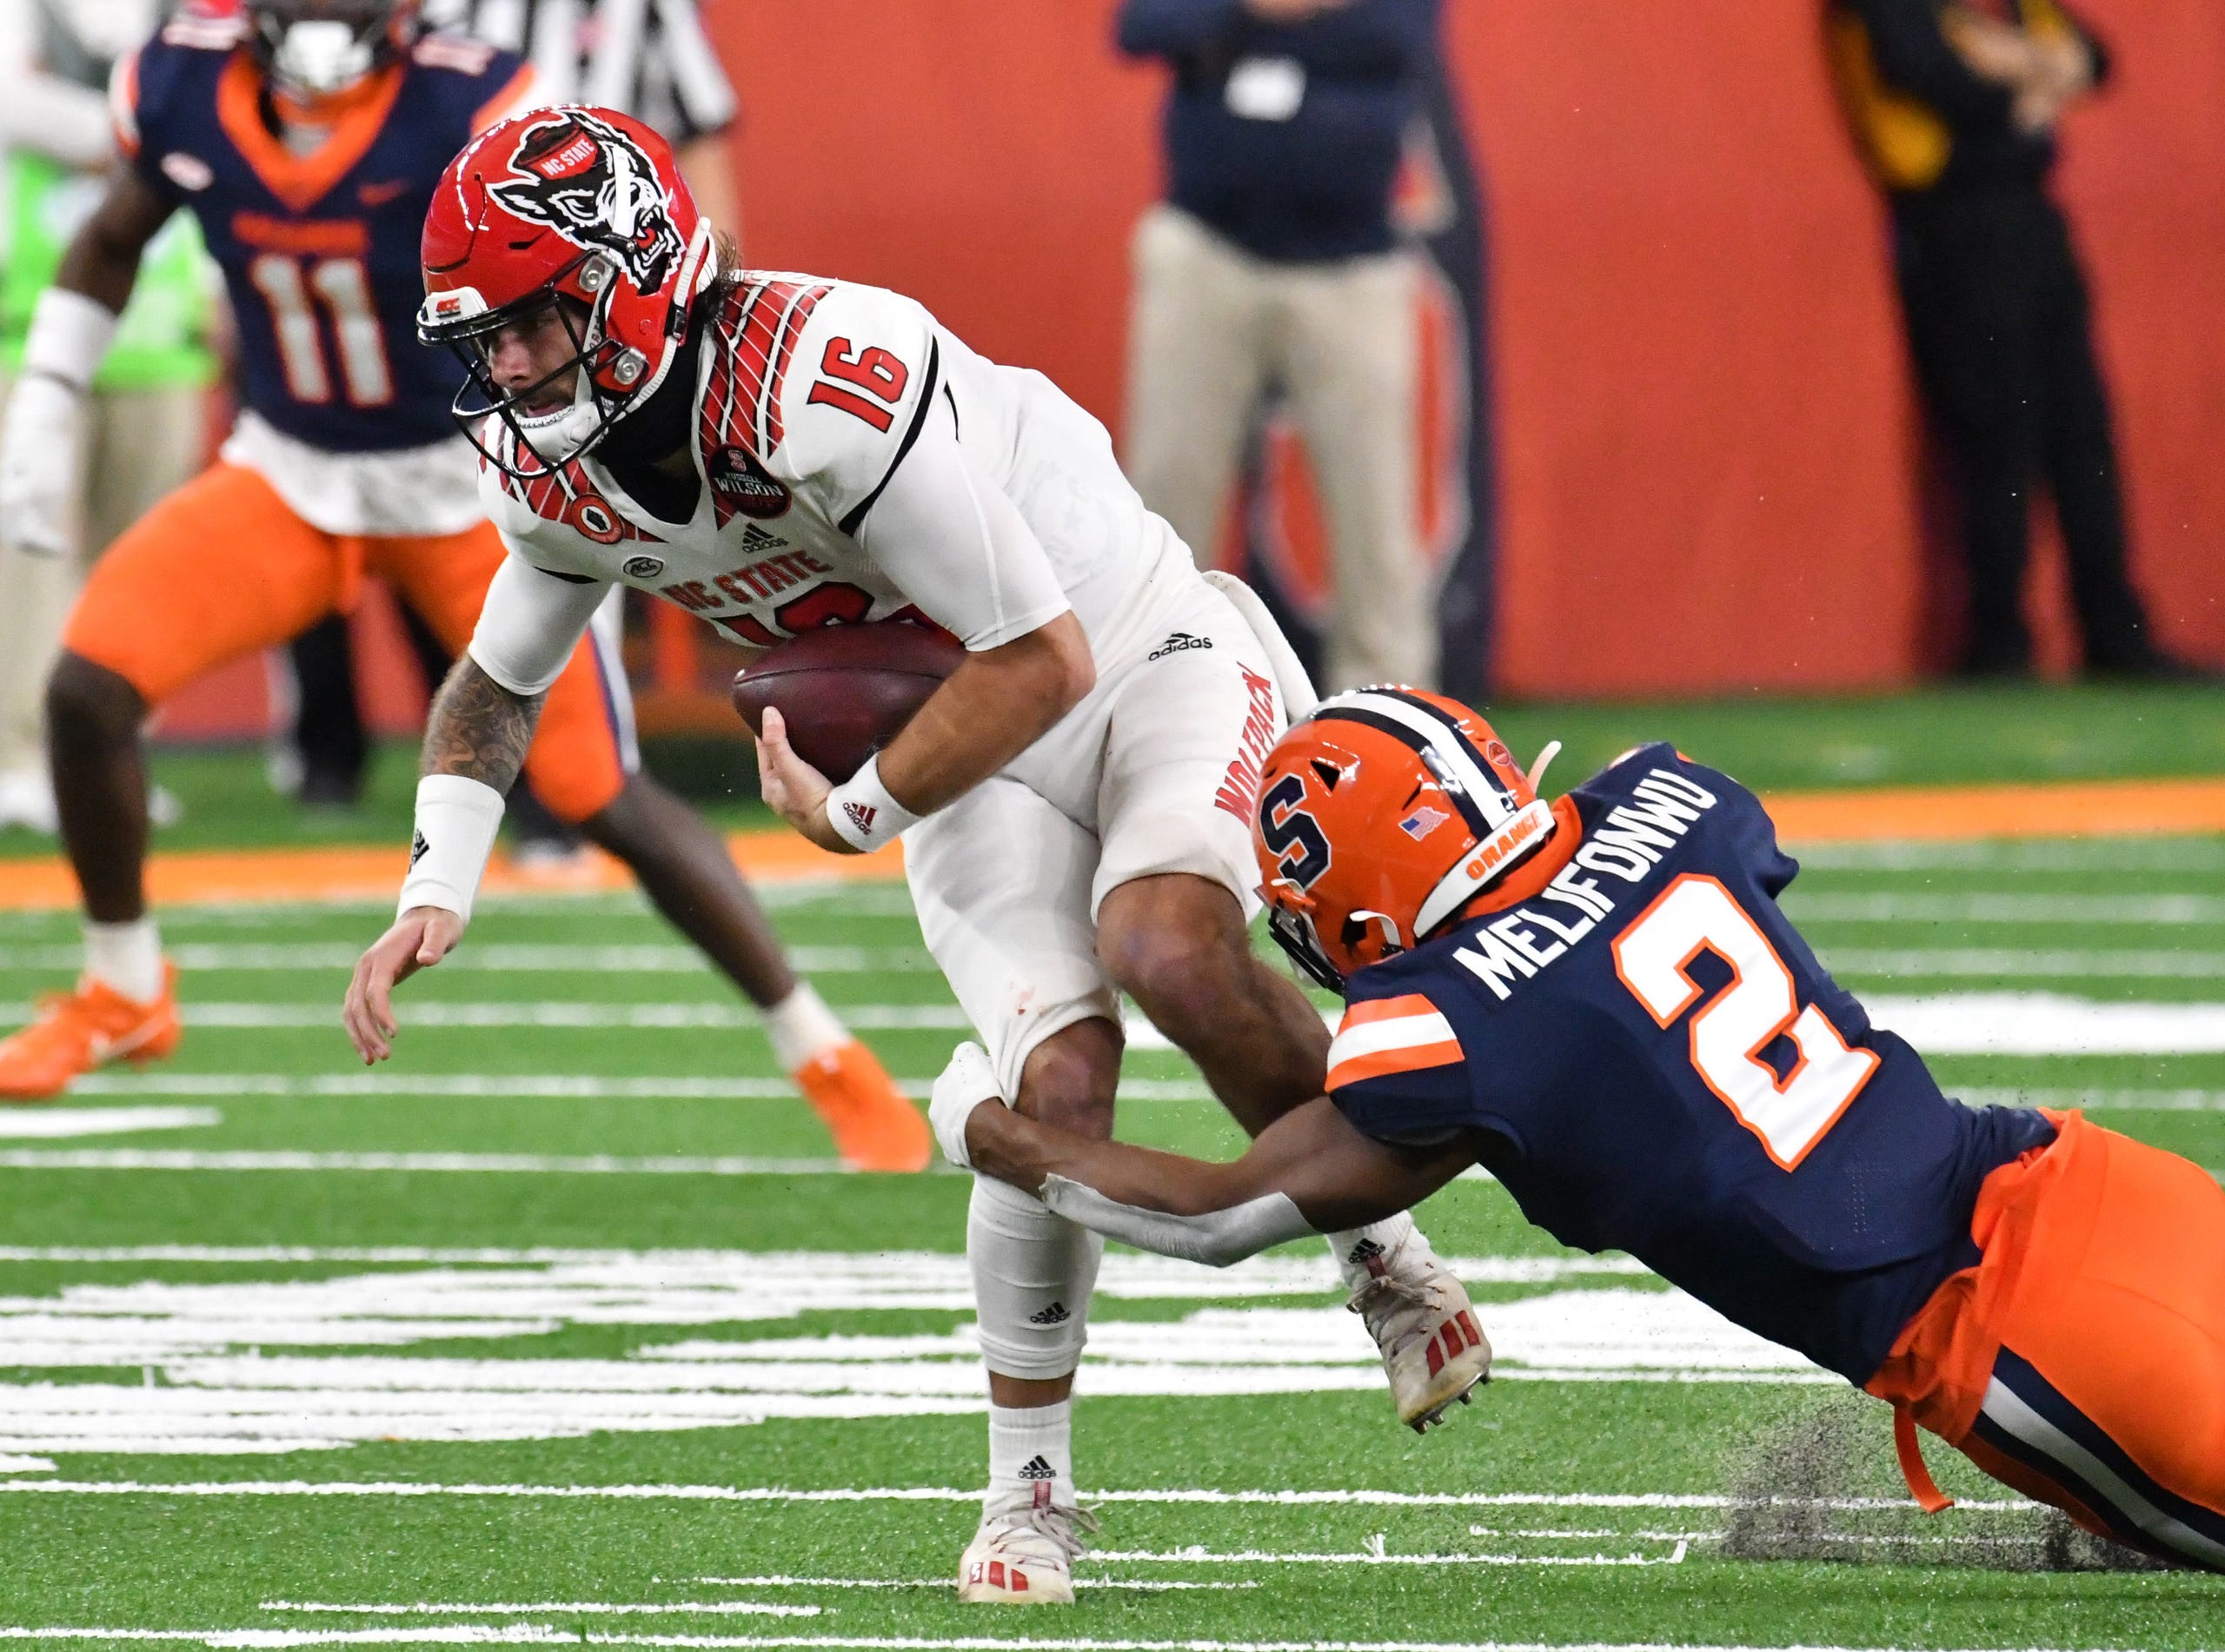 Syracuse defensive back Ifeatu Melifonwu sacks North Carolina State quarterback Bailey Hockman during the second quarter of a game last month at the Carrier Dome.